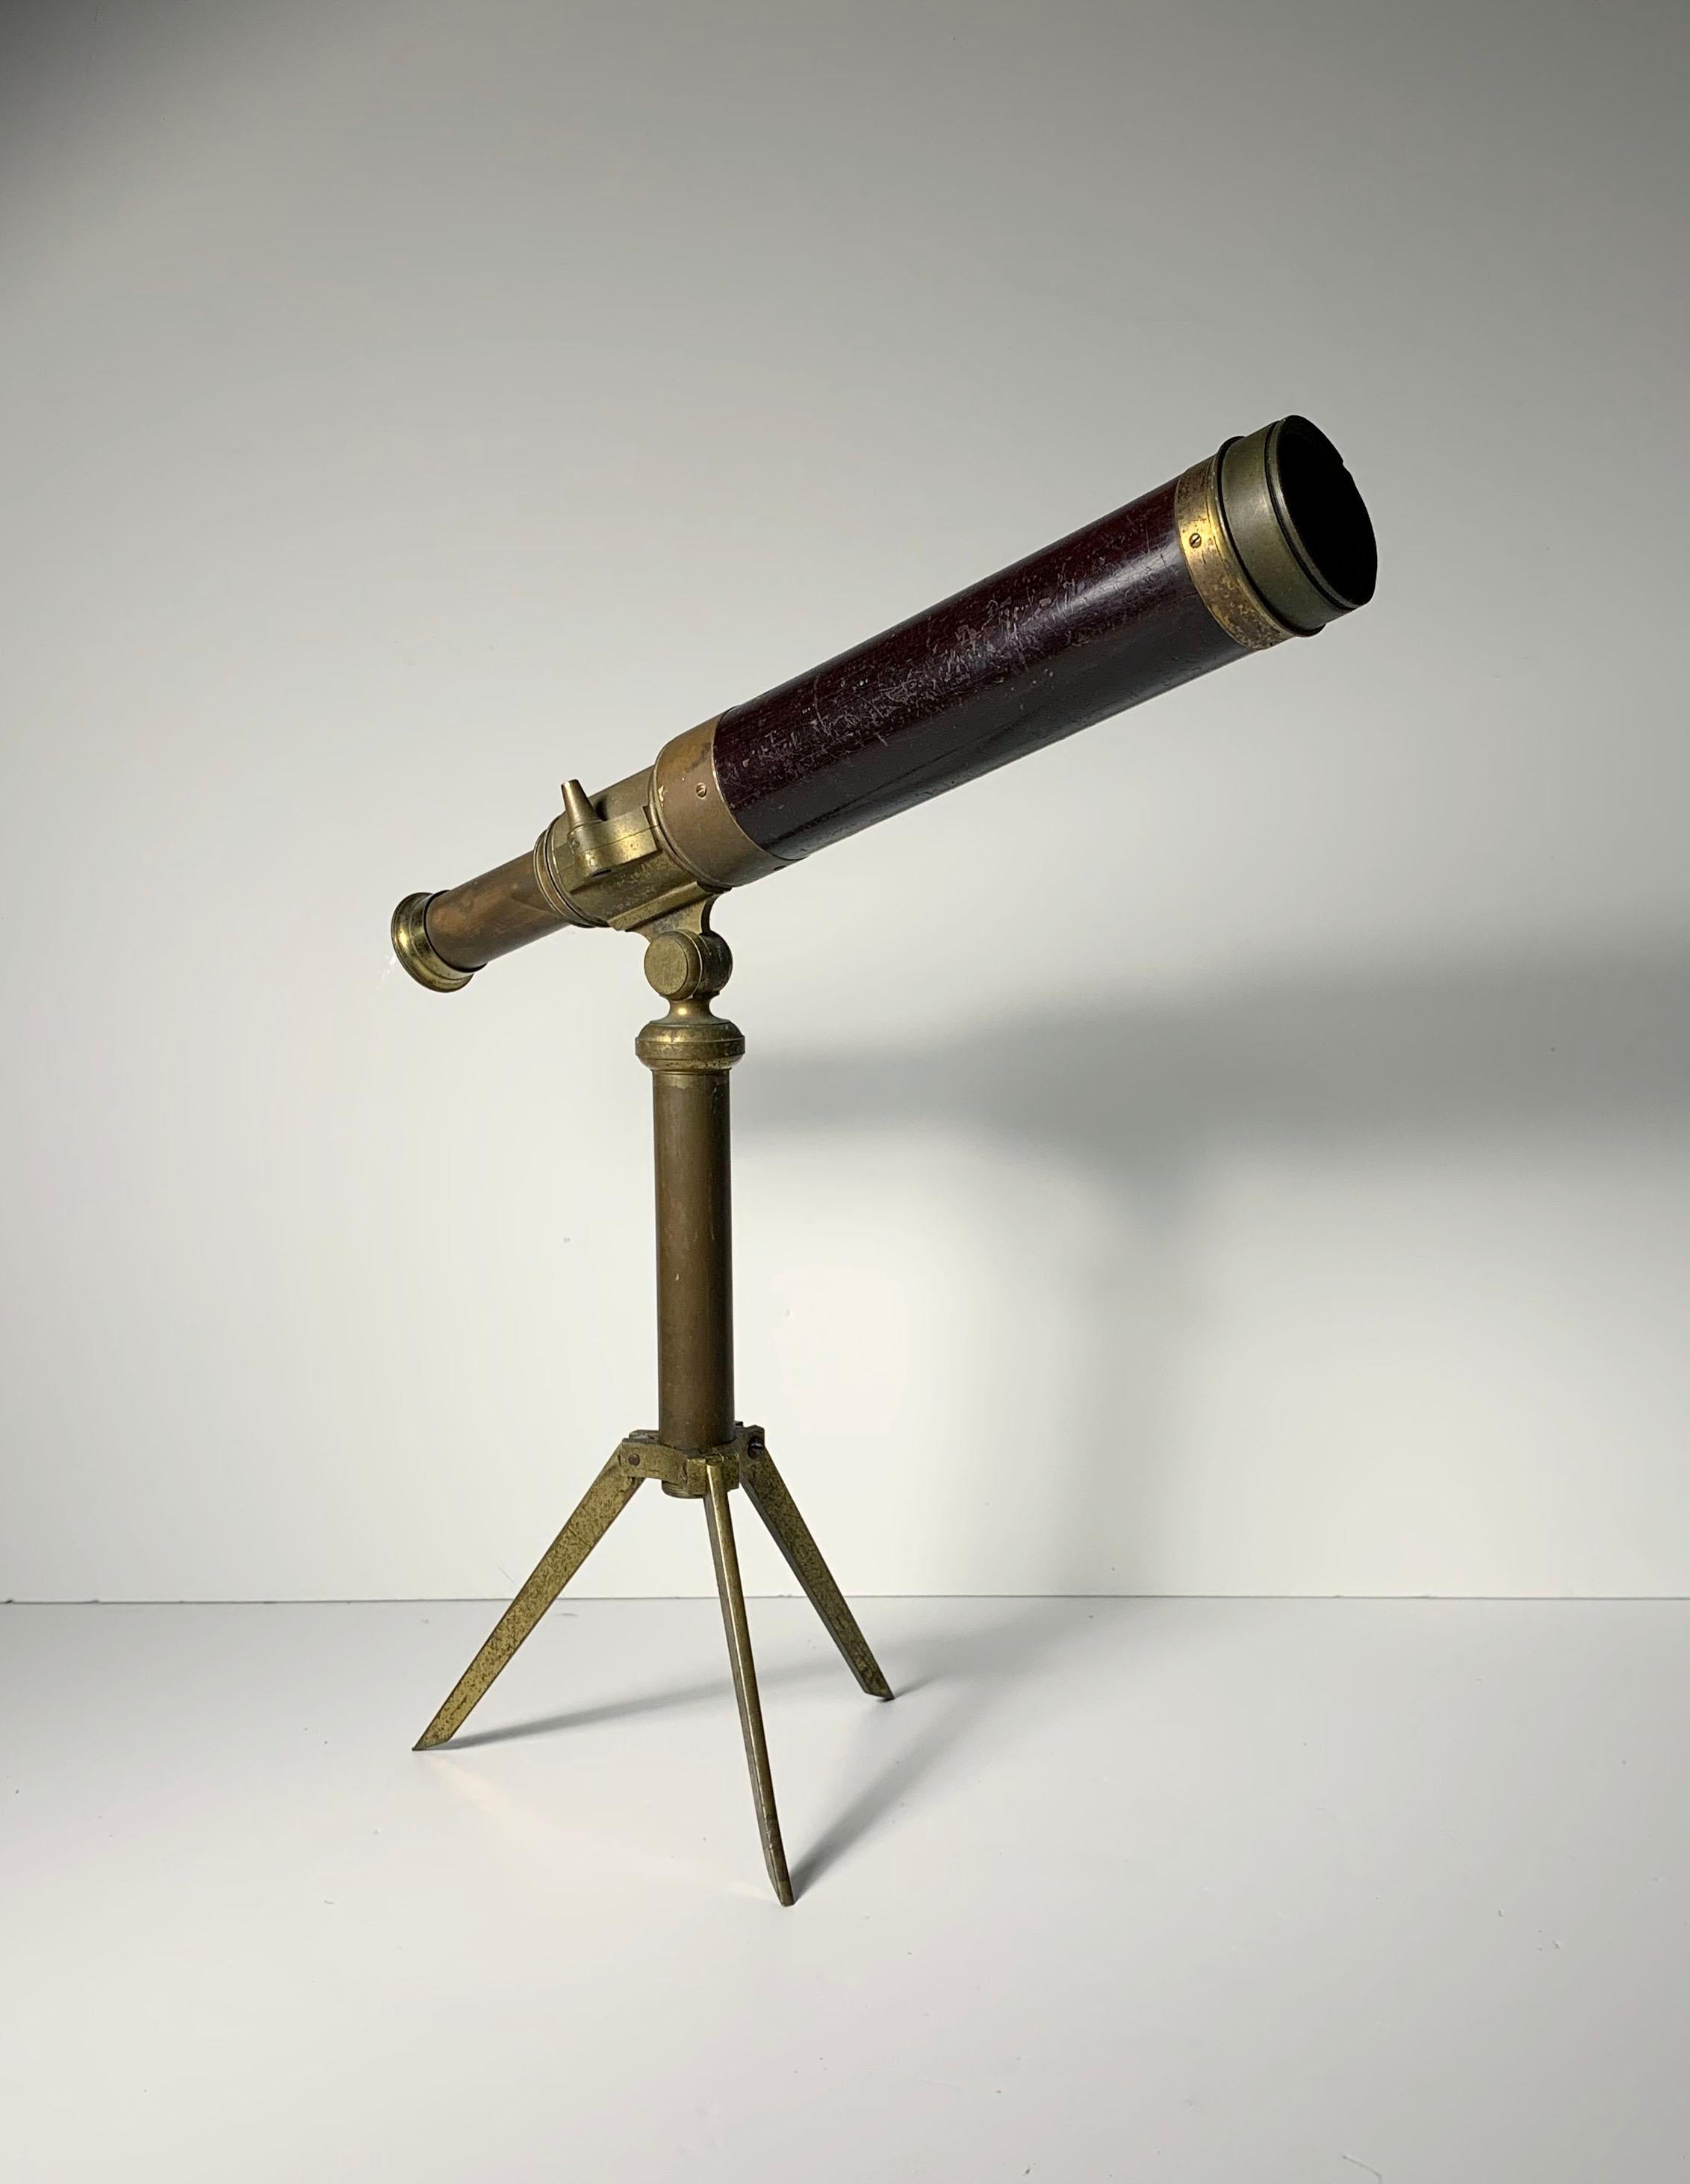 A vintage gentleman's library telescope

Not sure exactly of it's age. Estimated Mid Victorian Period ( 1860-1880). Uncertain to maker and origin.
Has wear overall and missing some components. Purely for decorative appreciation in less one